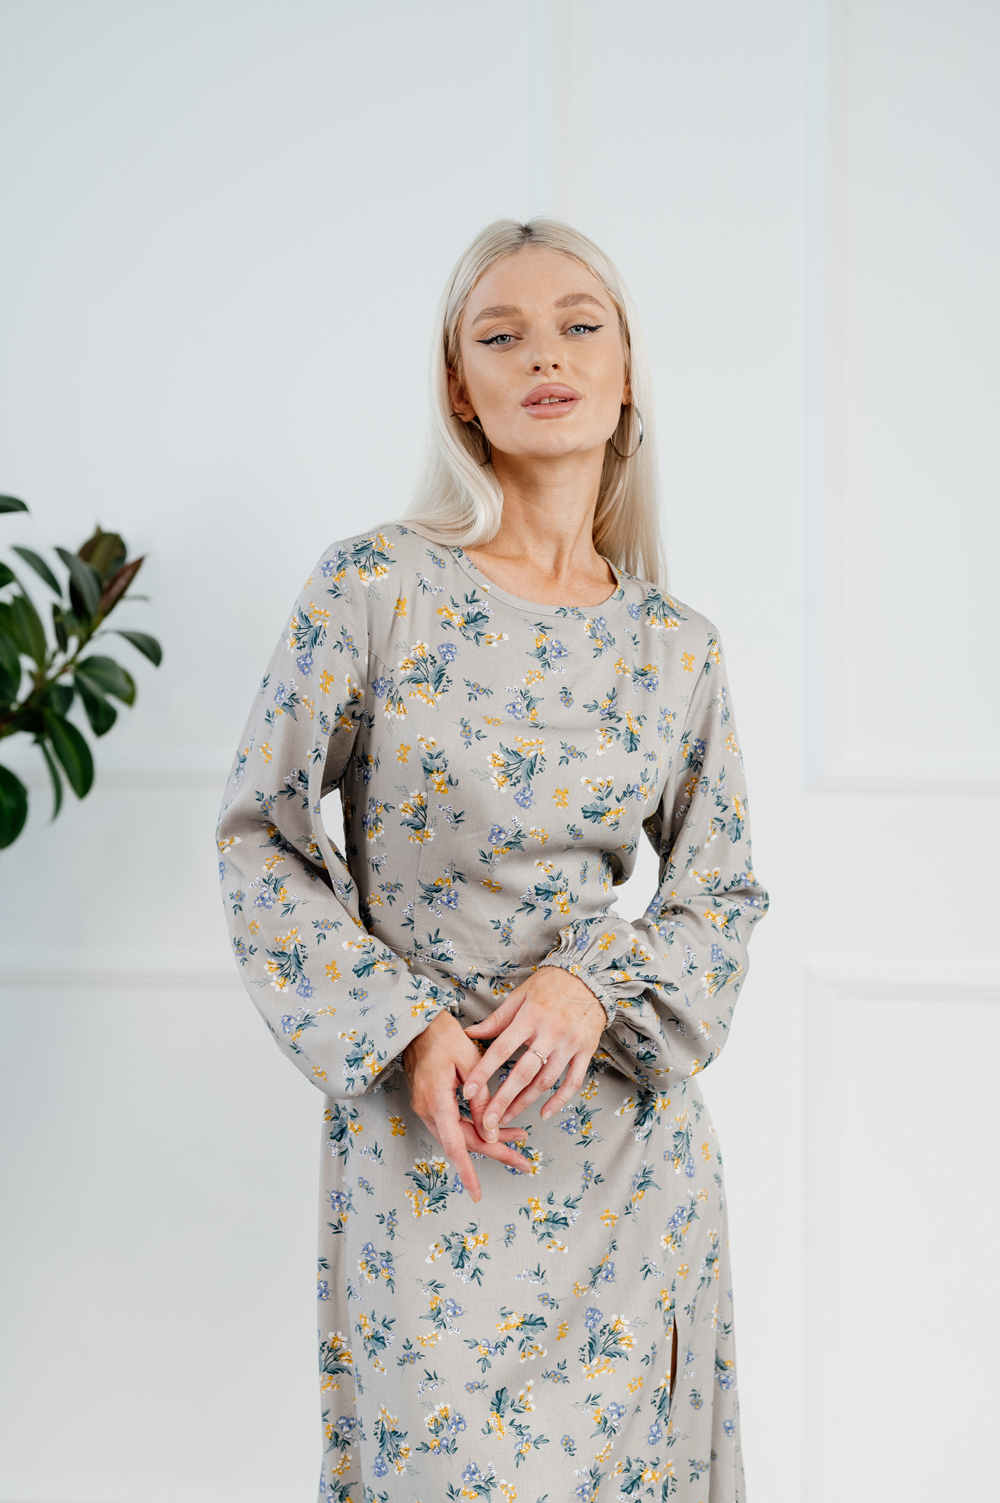 Ashy fitted midi dress in a floral print below the knee